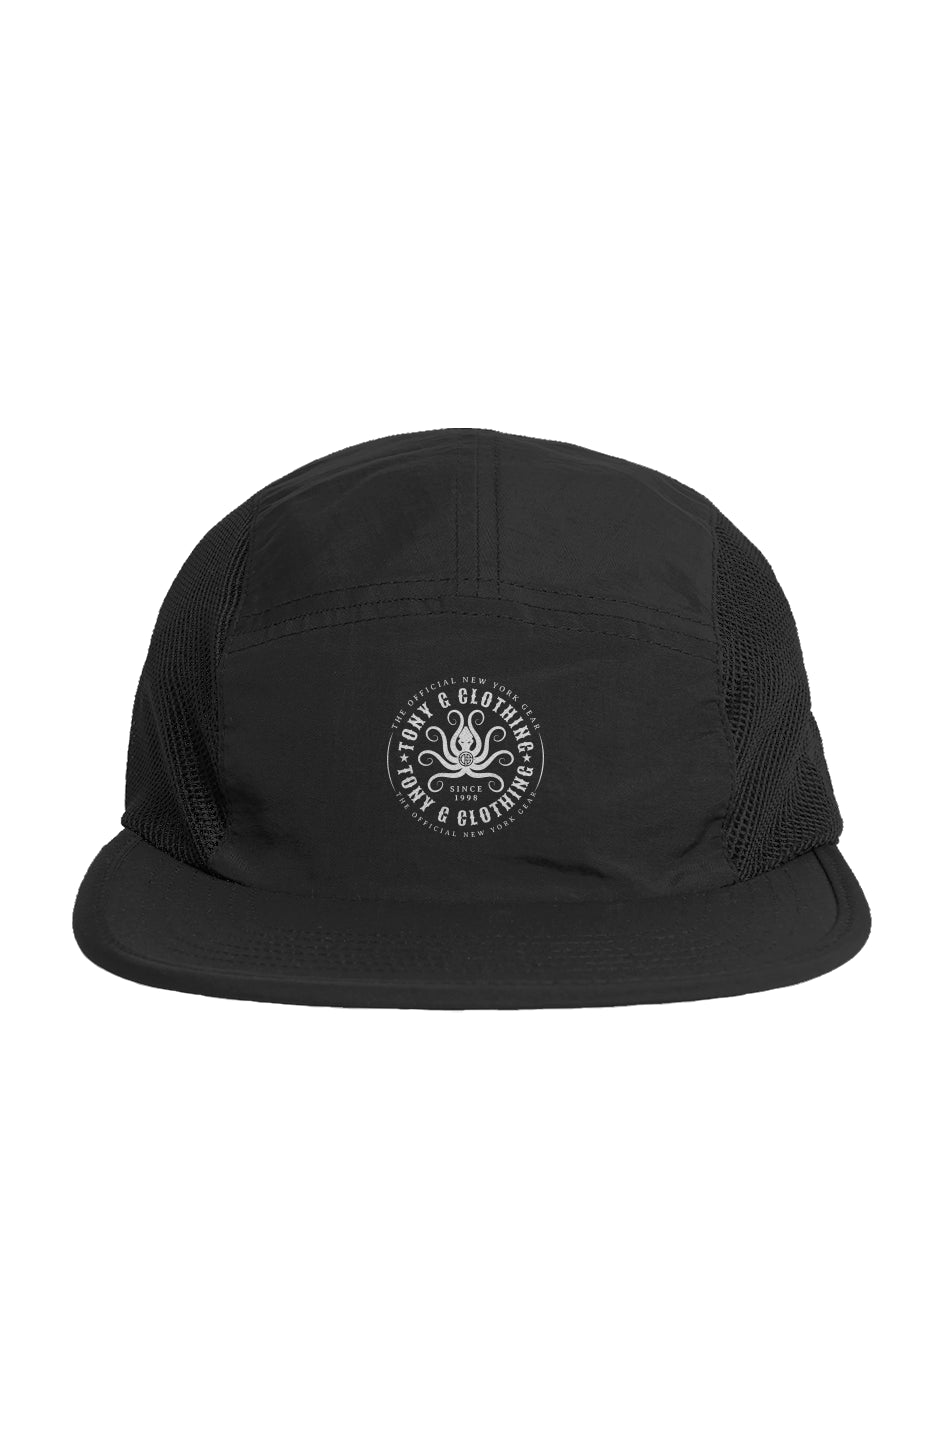 TONY G five panel cap, featuring the TG Logo Outli